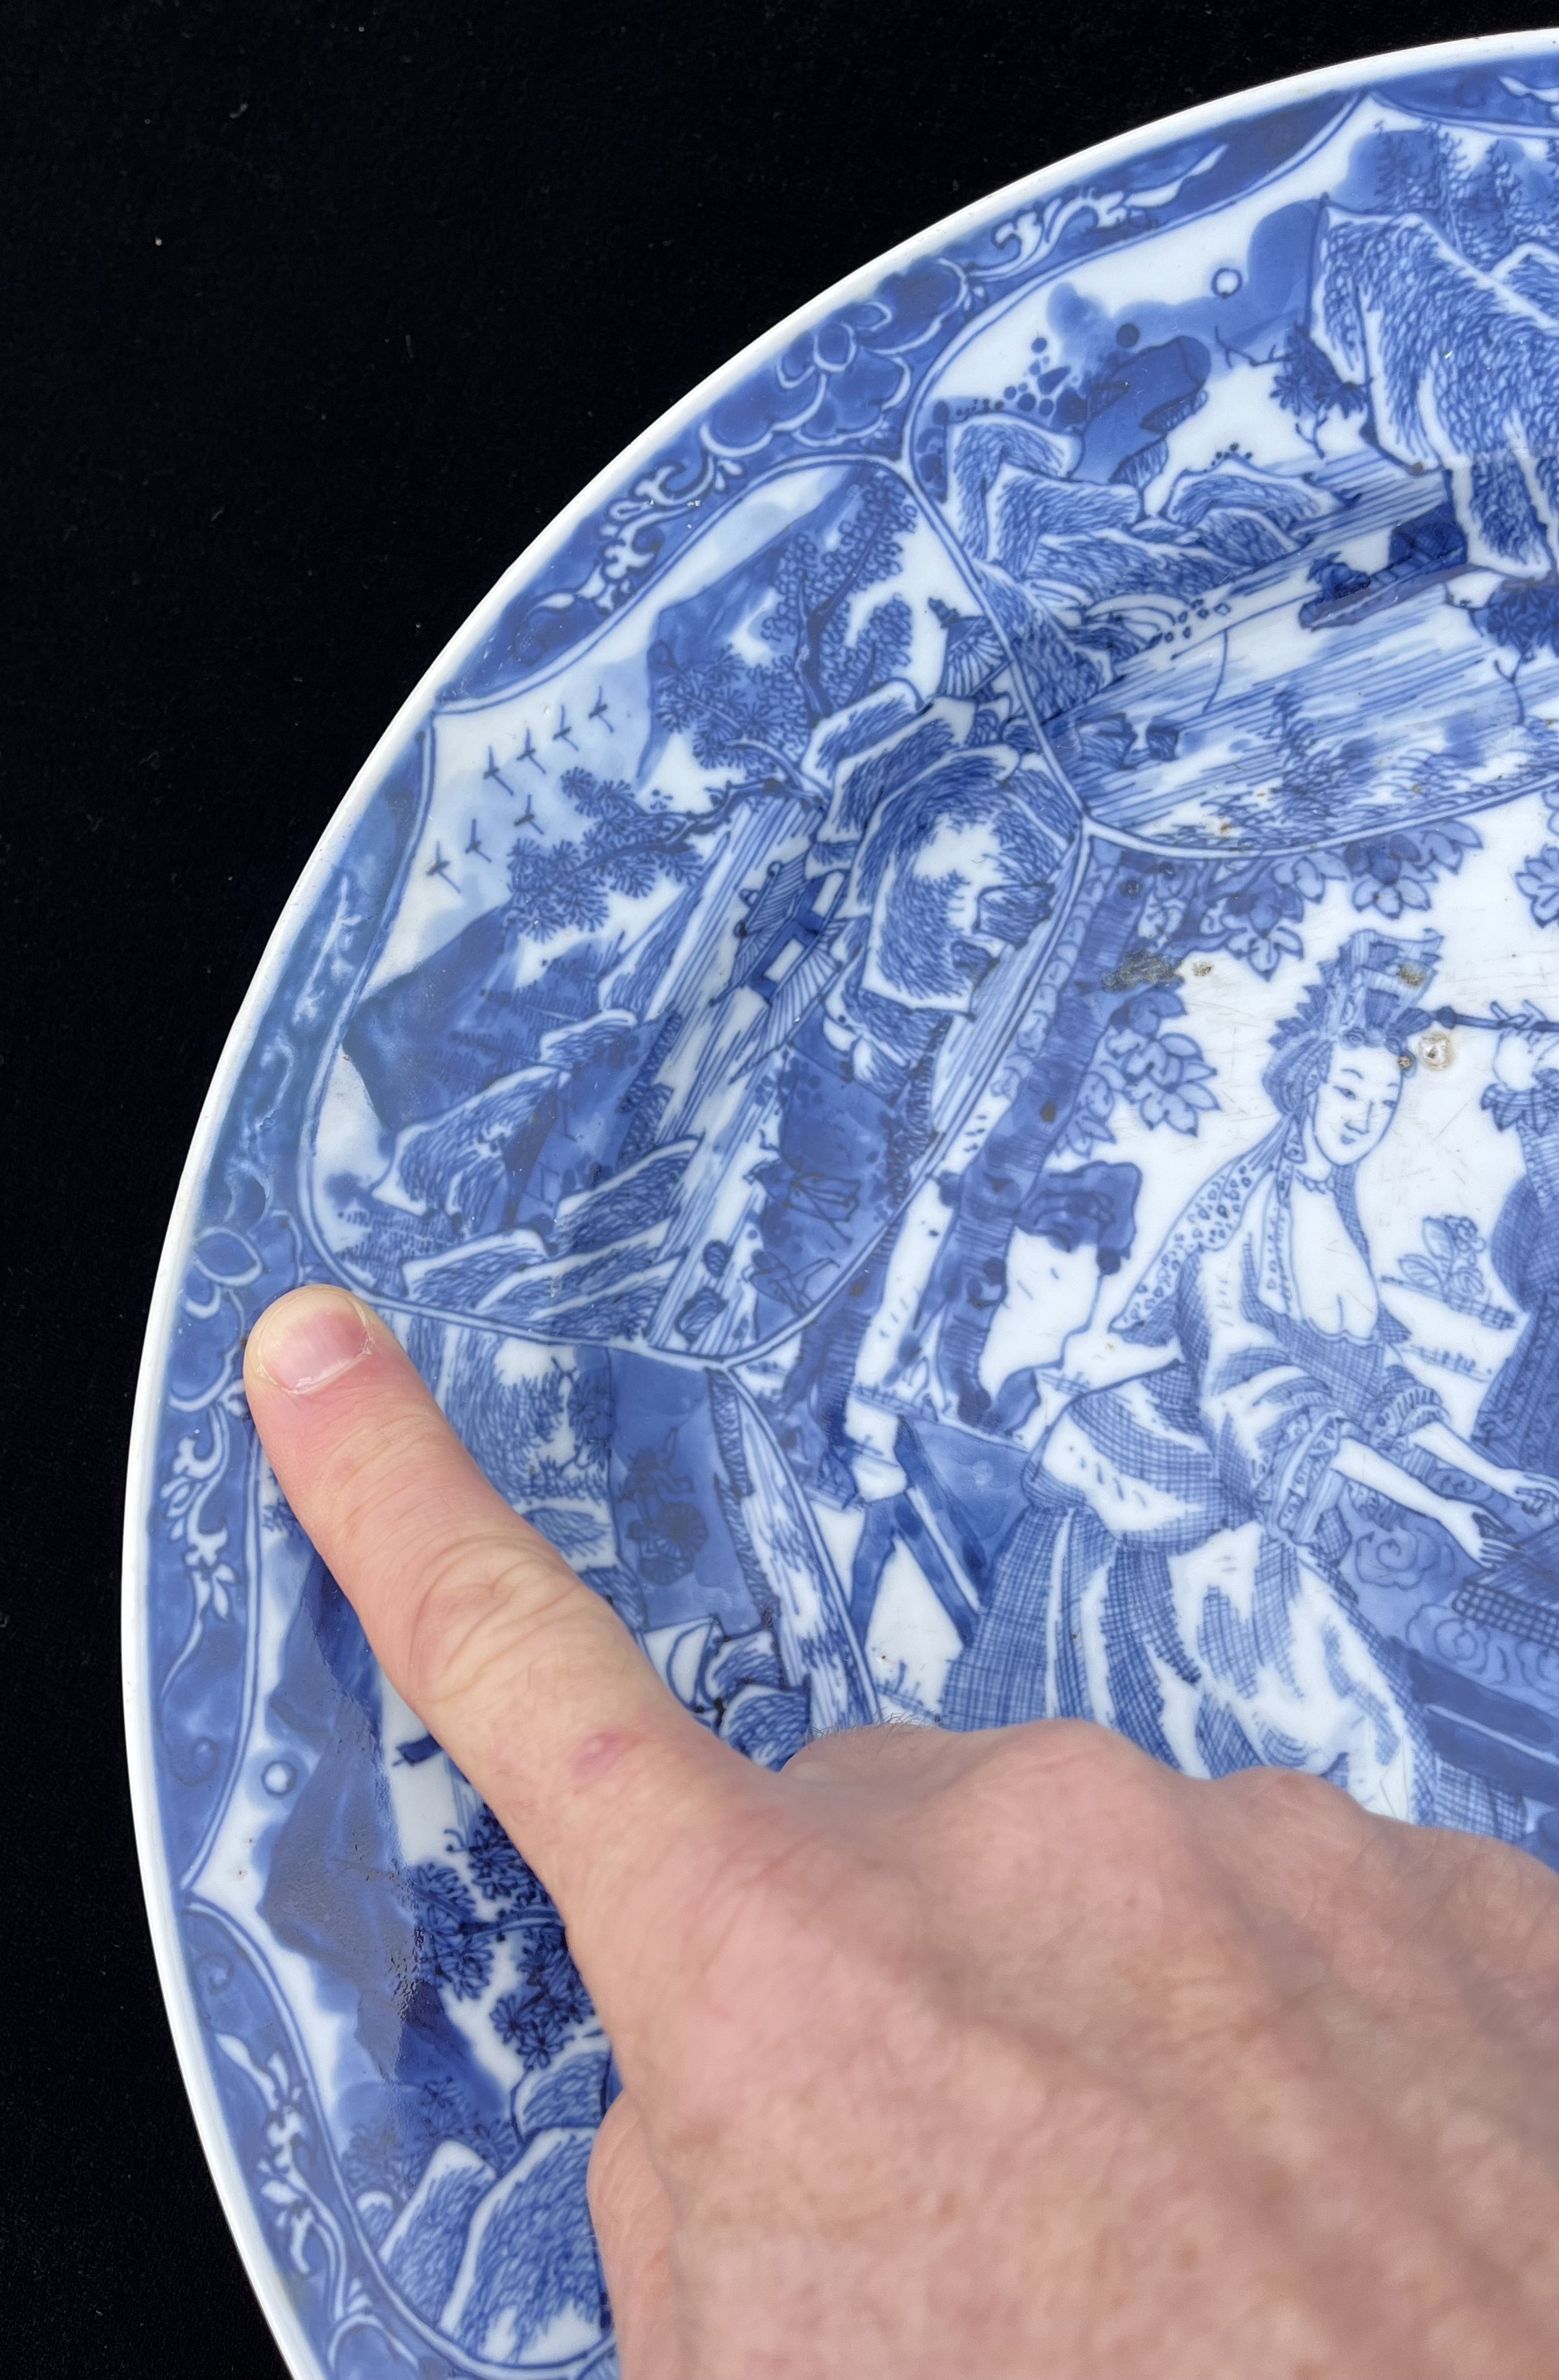 A CHINESE BLUE AND WHITE PORCELAIN ‘MUSICIANS' DISH, QING DYNASTY, KANGXI PERIOD, 1662 – 1722 - Image 10 of 11